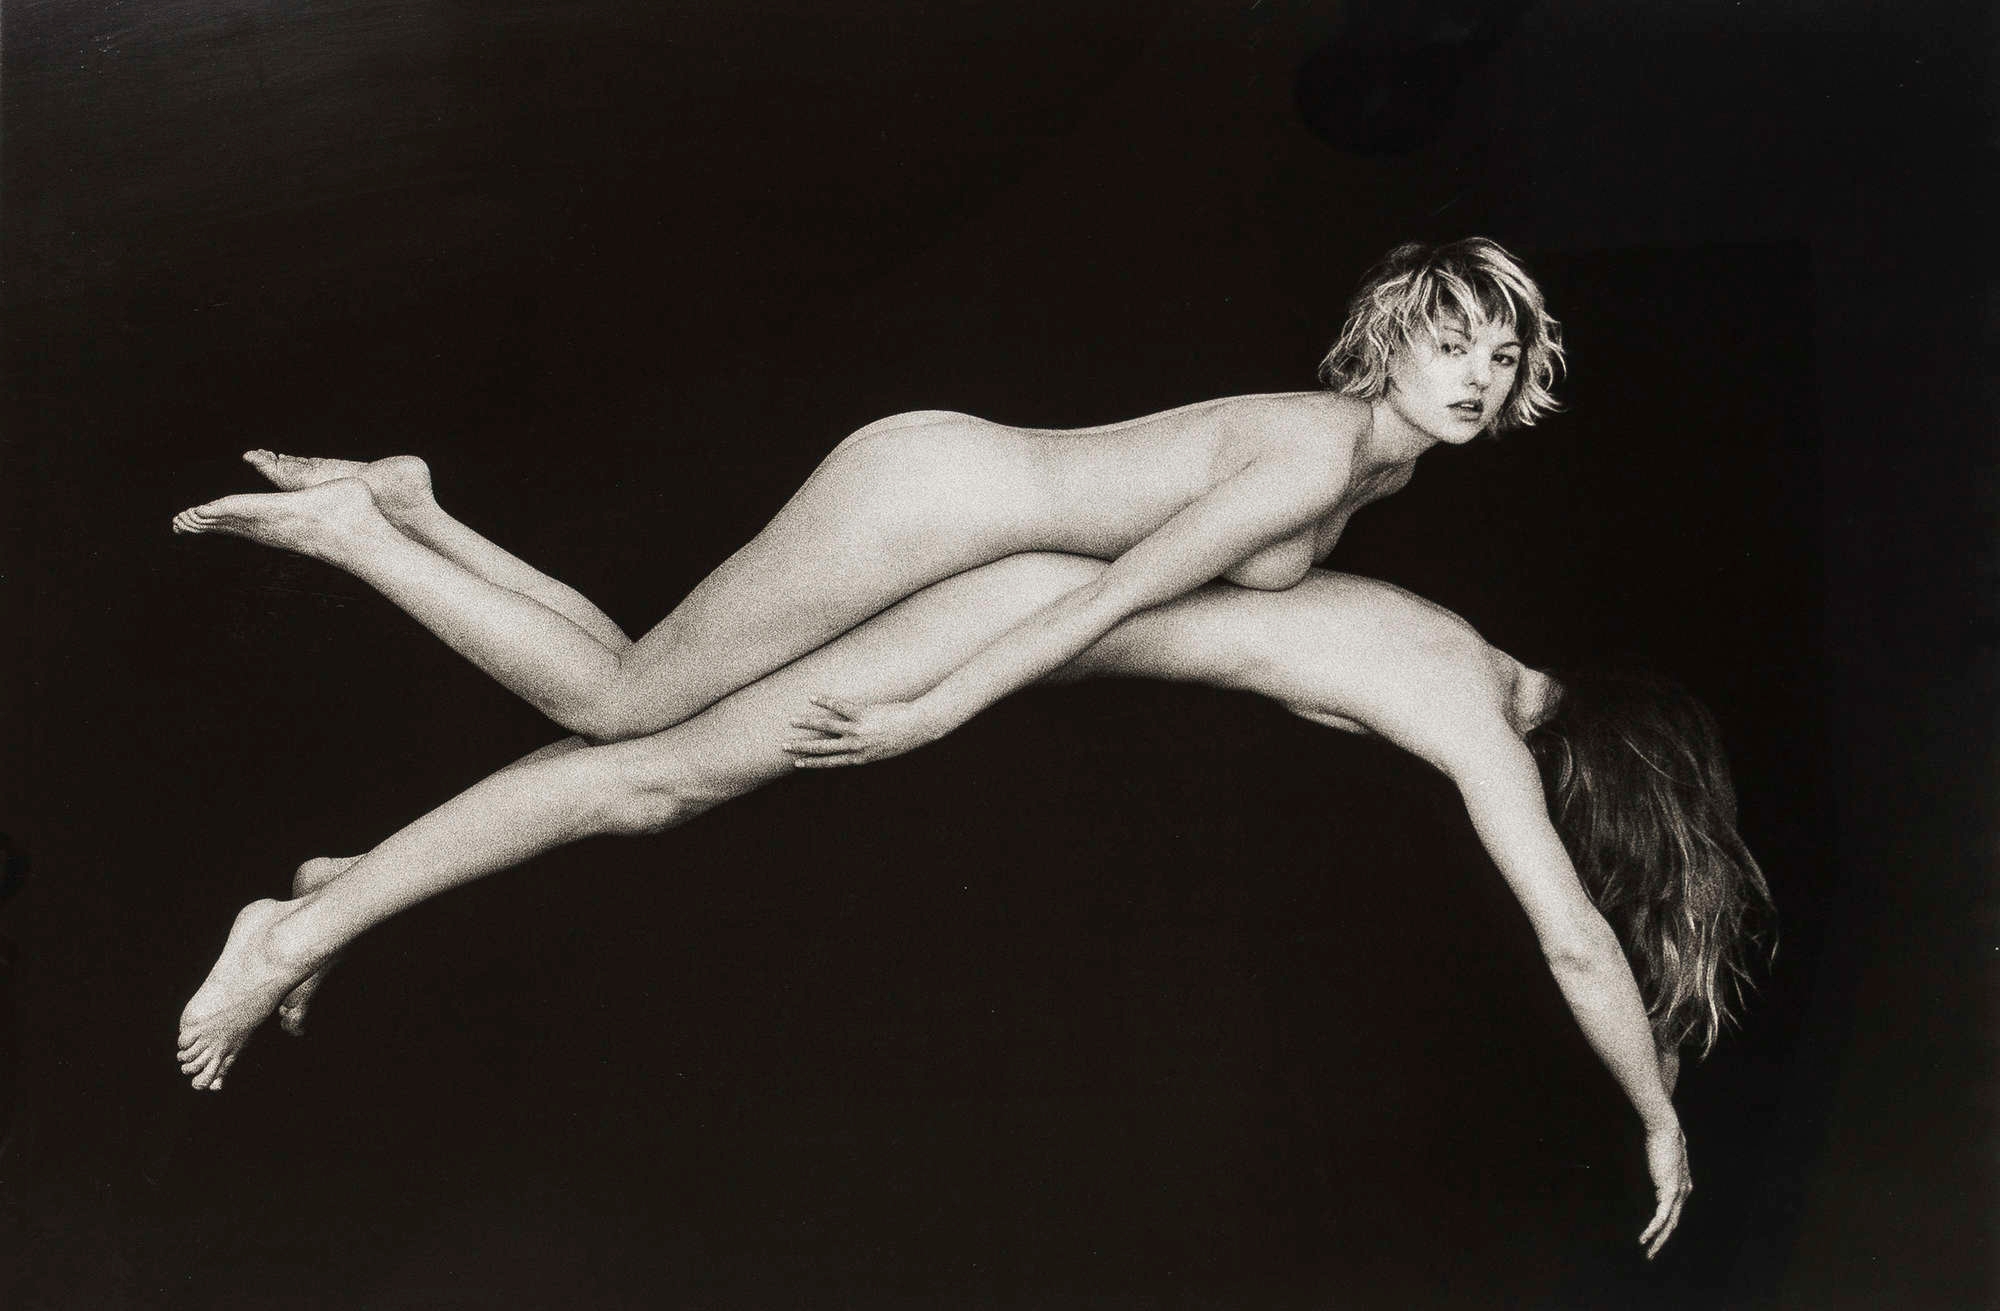 Two Works: Raftride, 1999; Vicky and Vanessa by Bob Carlos Clarke, 1999, printed 2011